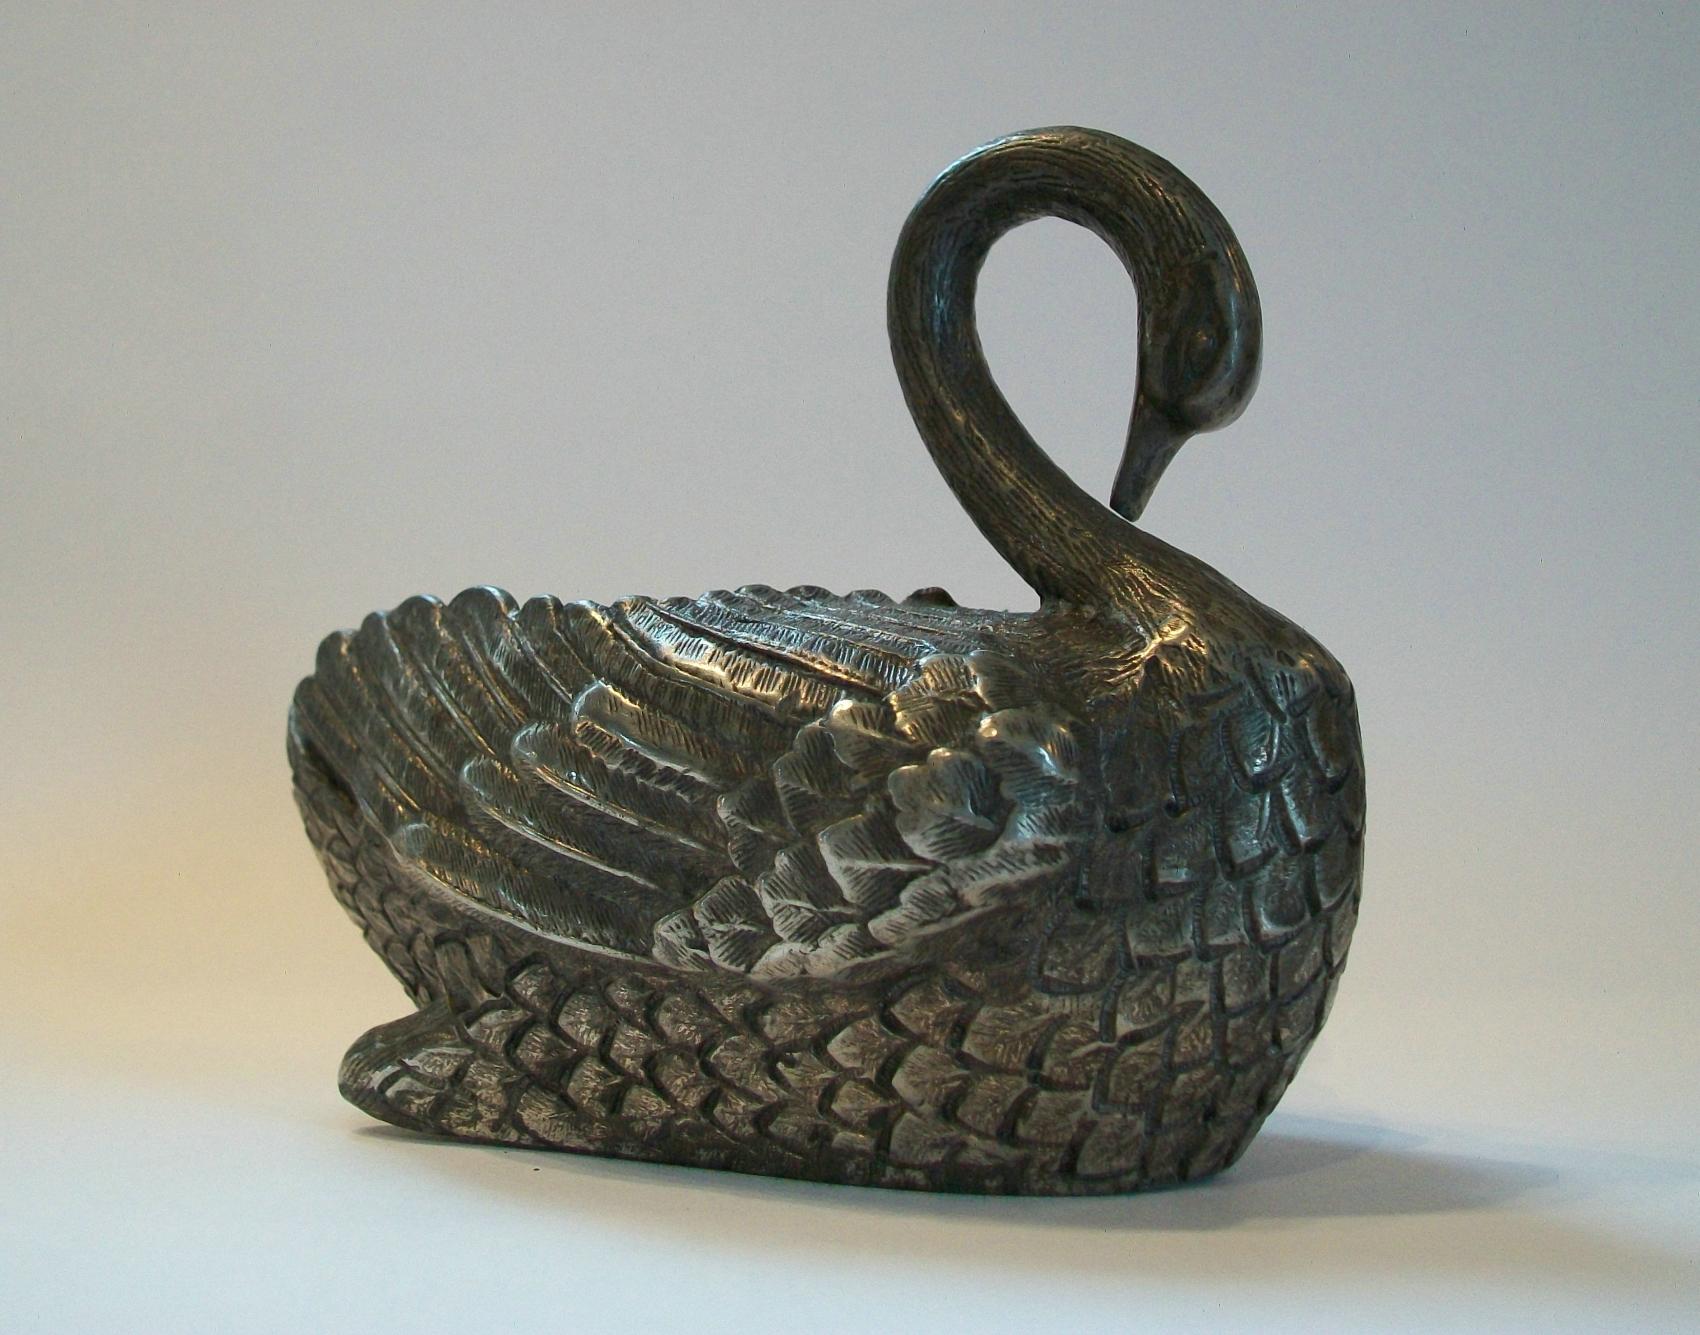 Vintage White Metal Swan with Hand Chased Details, U.S.a, Mid-20th Century For Sale 2